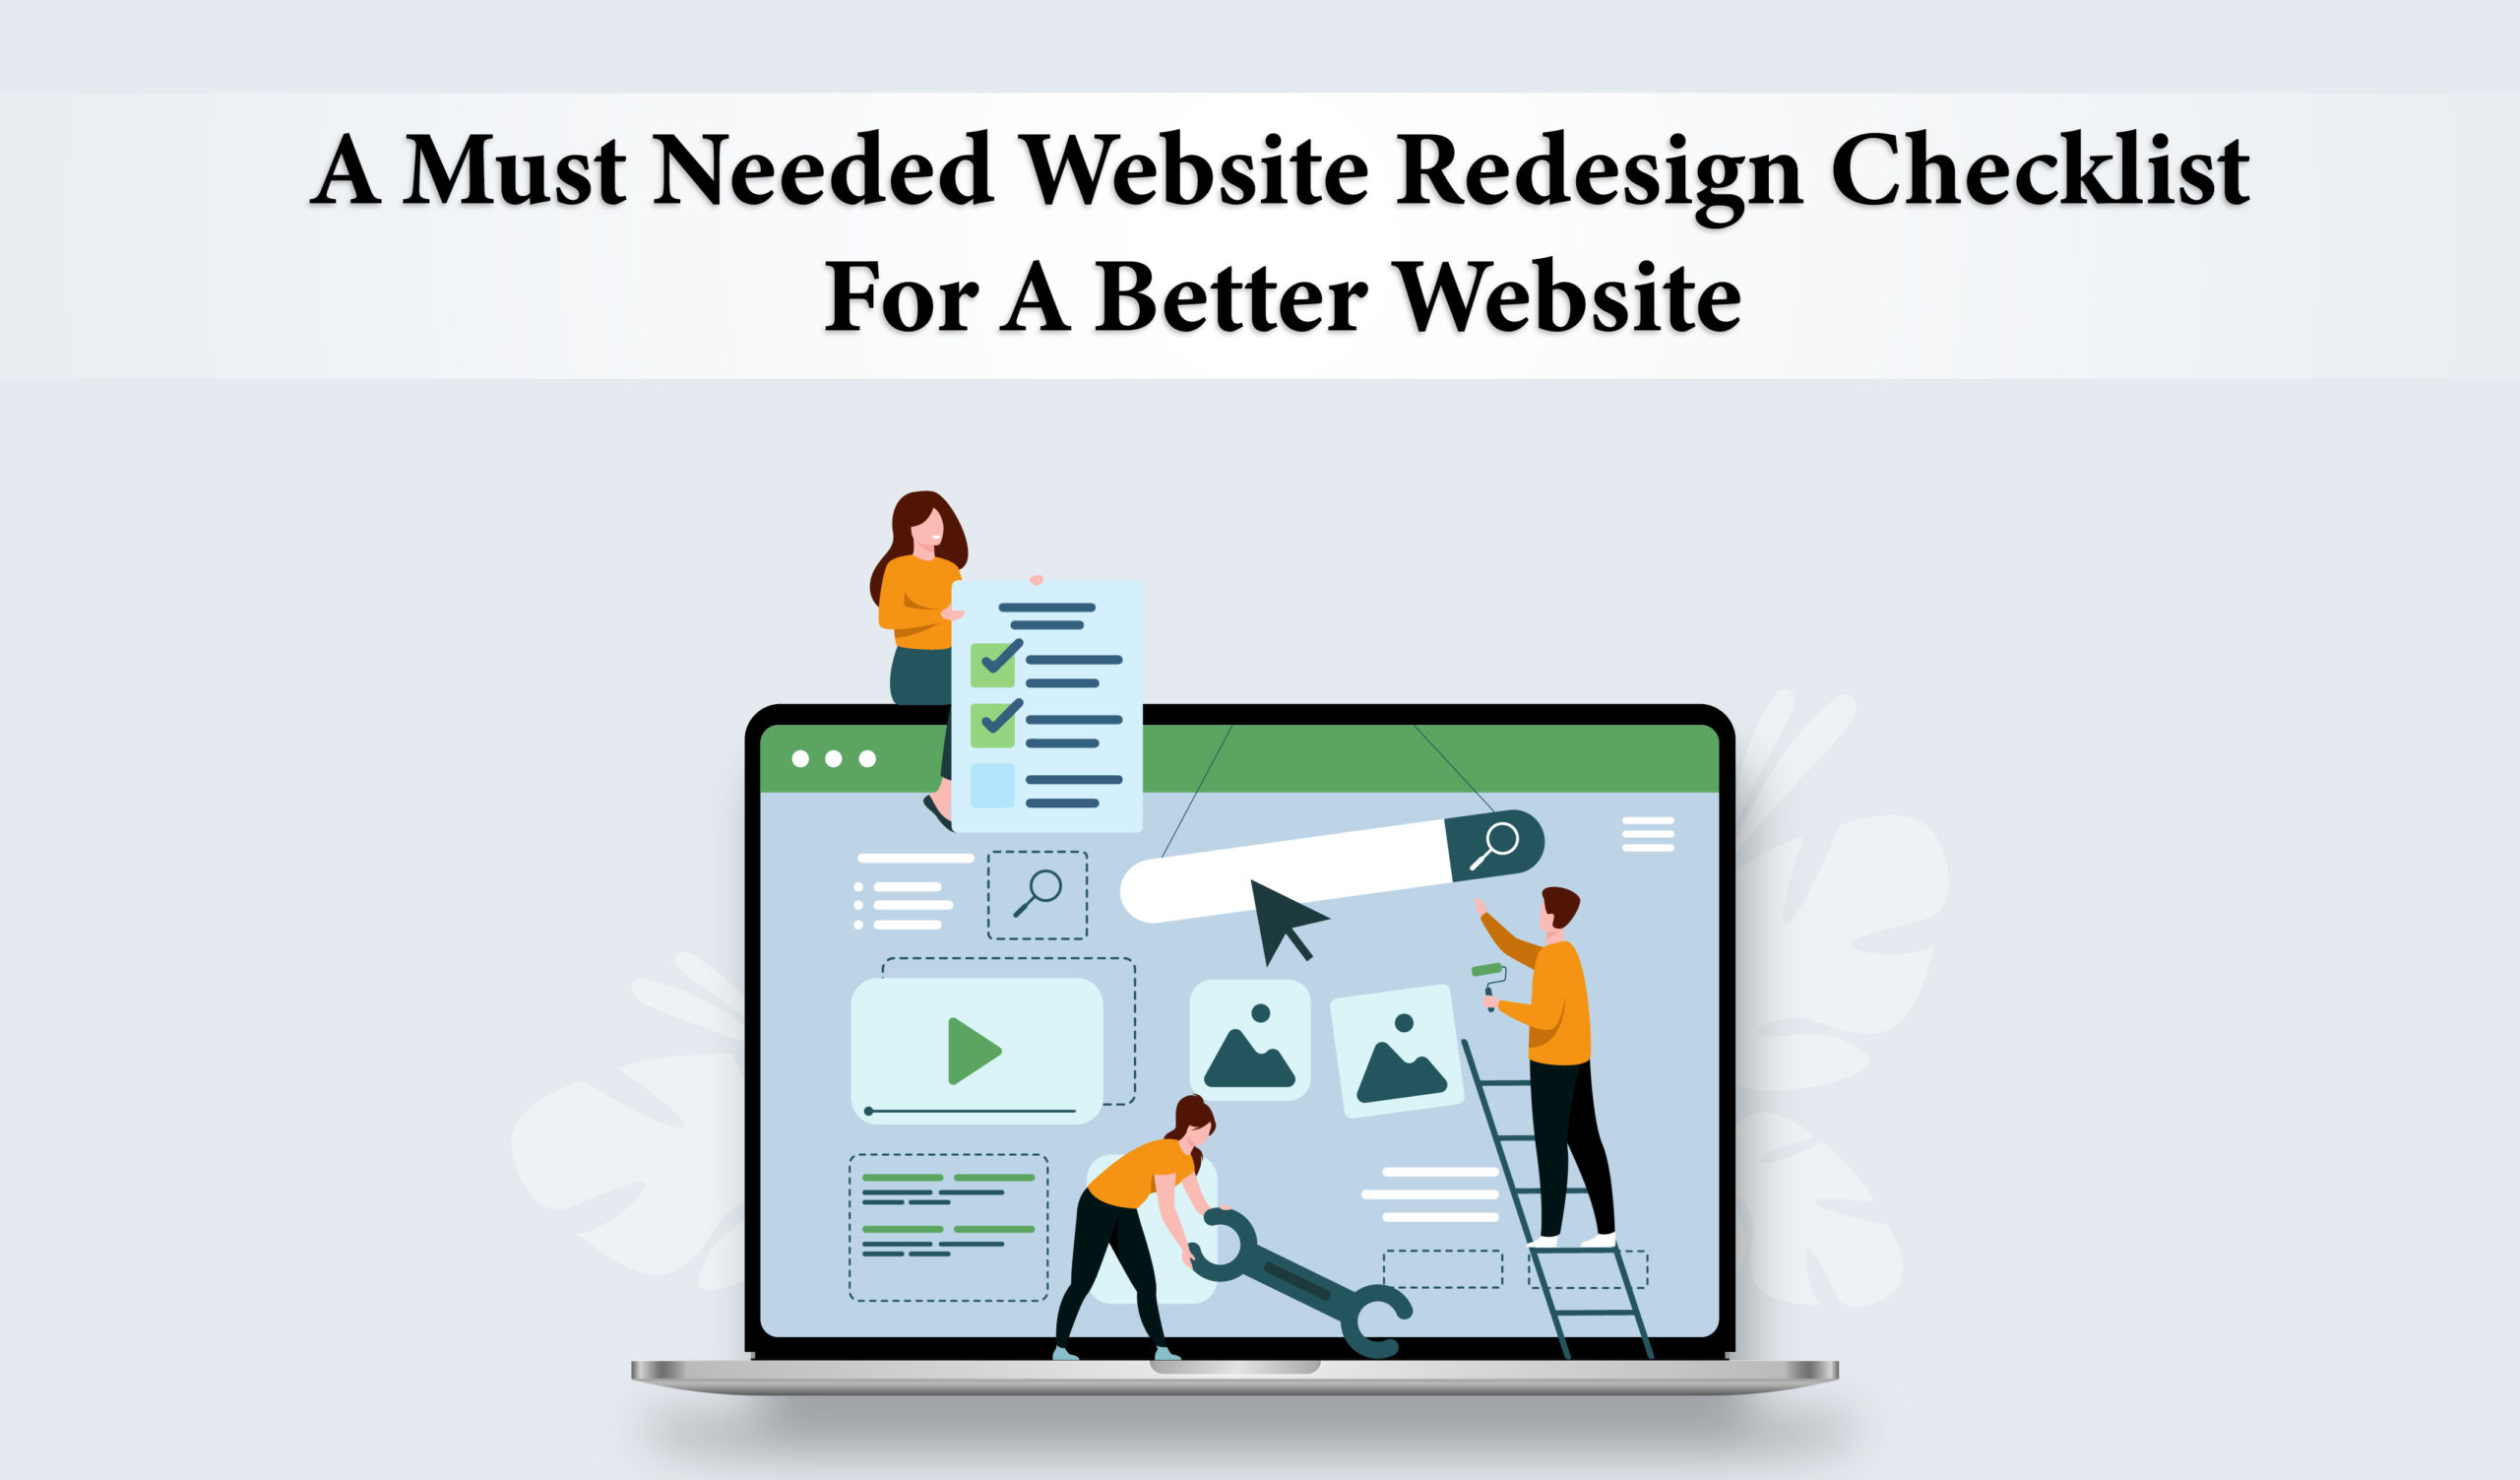 A Must Needed Website Redesign Checklist for A Better Website